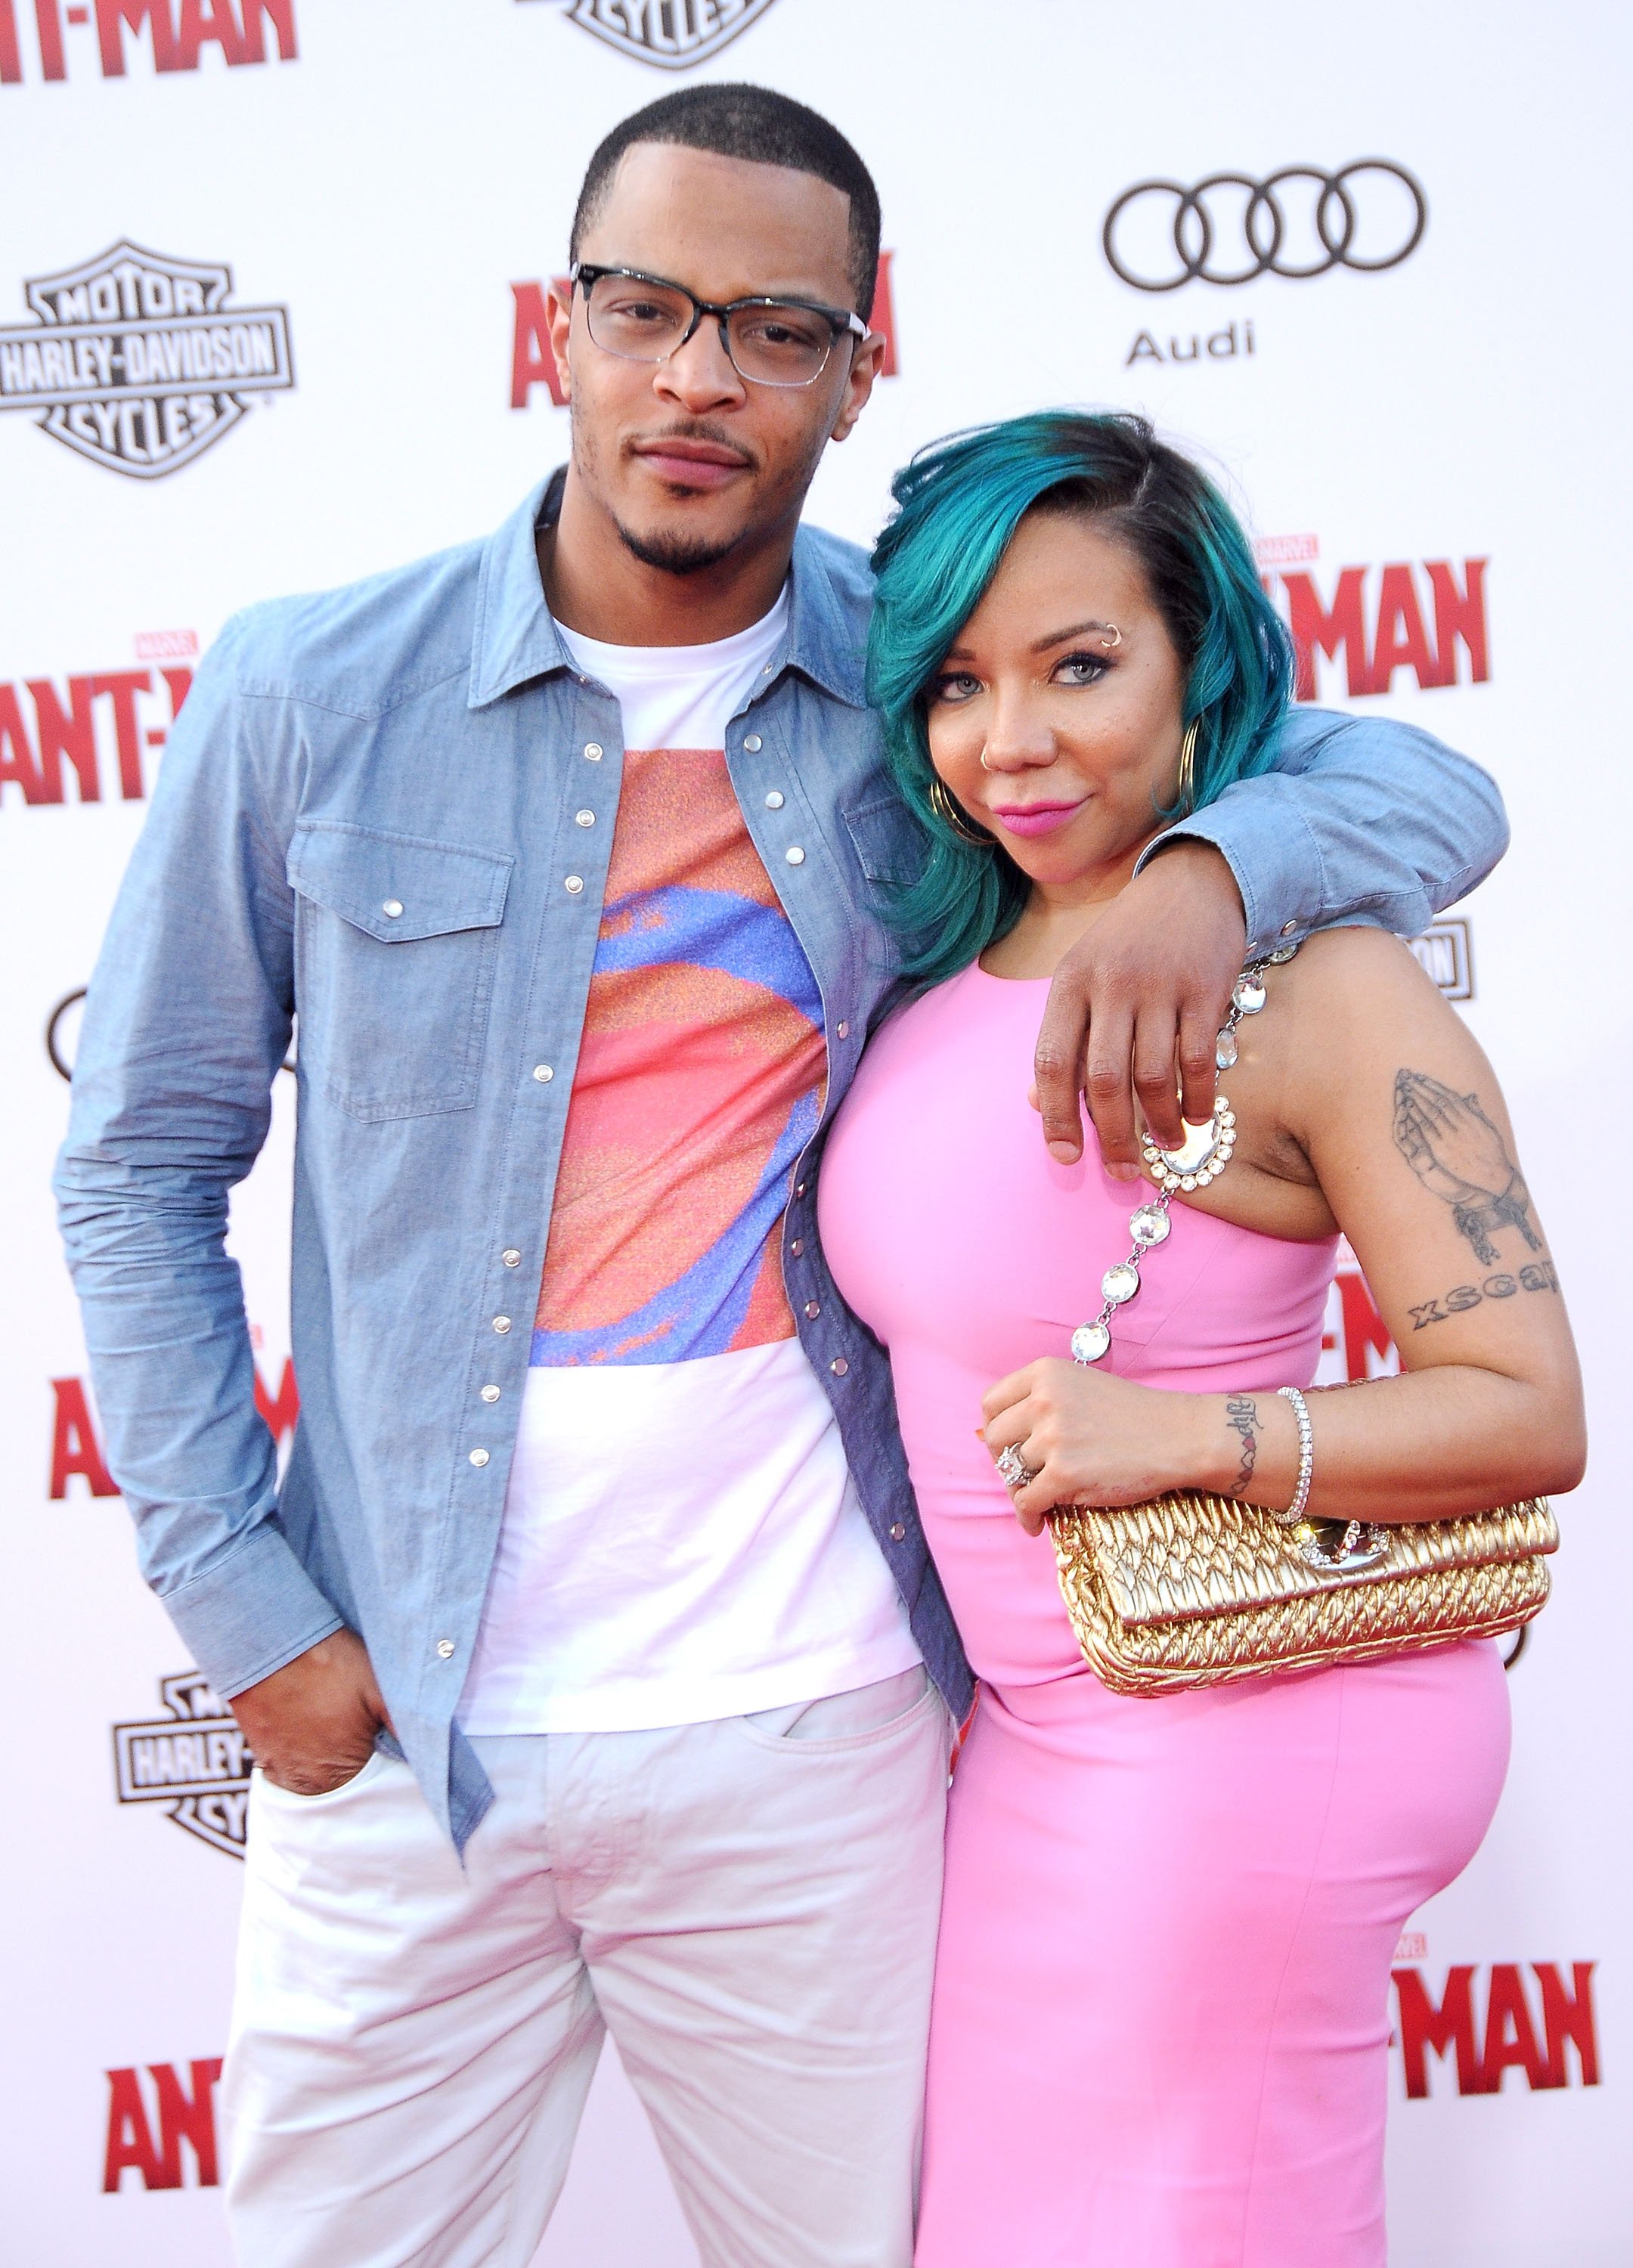 T.I. and Tiny Harris at the premiere of "Ant-Man" in June 2015. | Photo: Getty Images